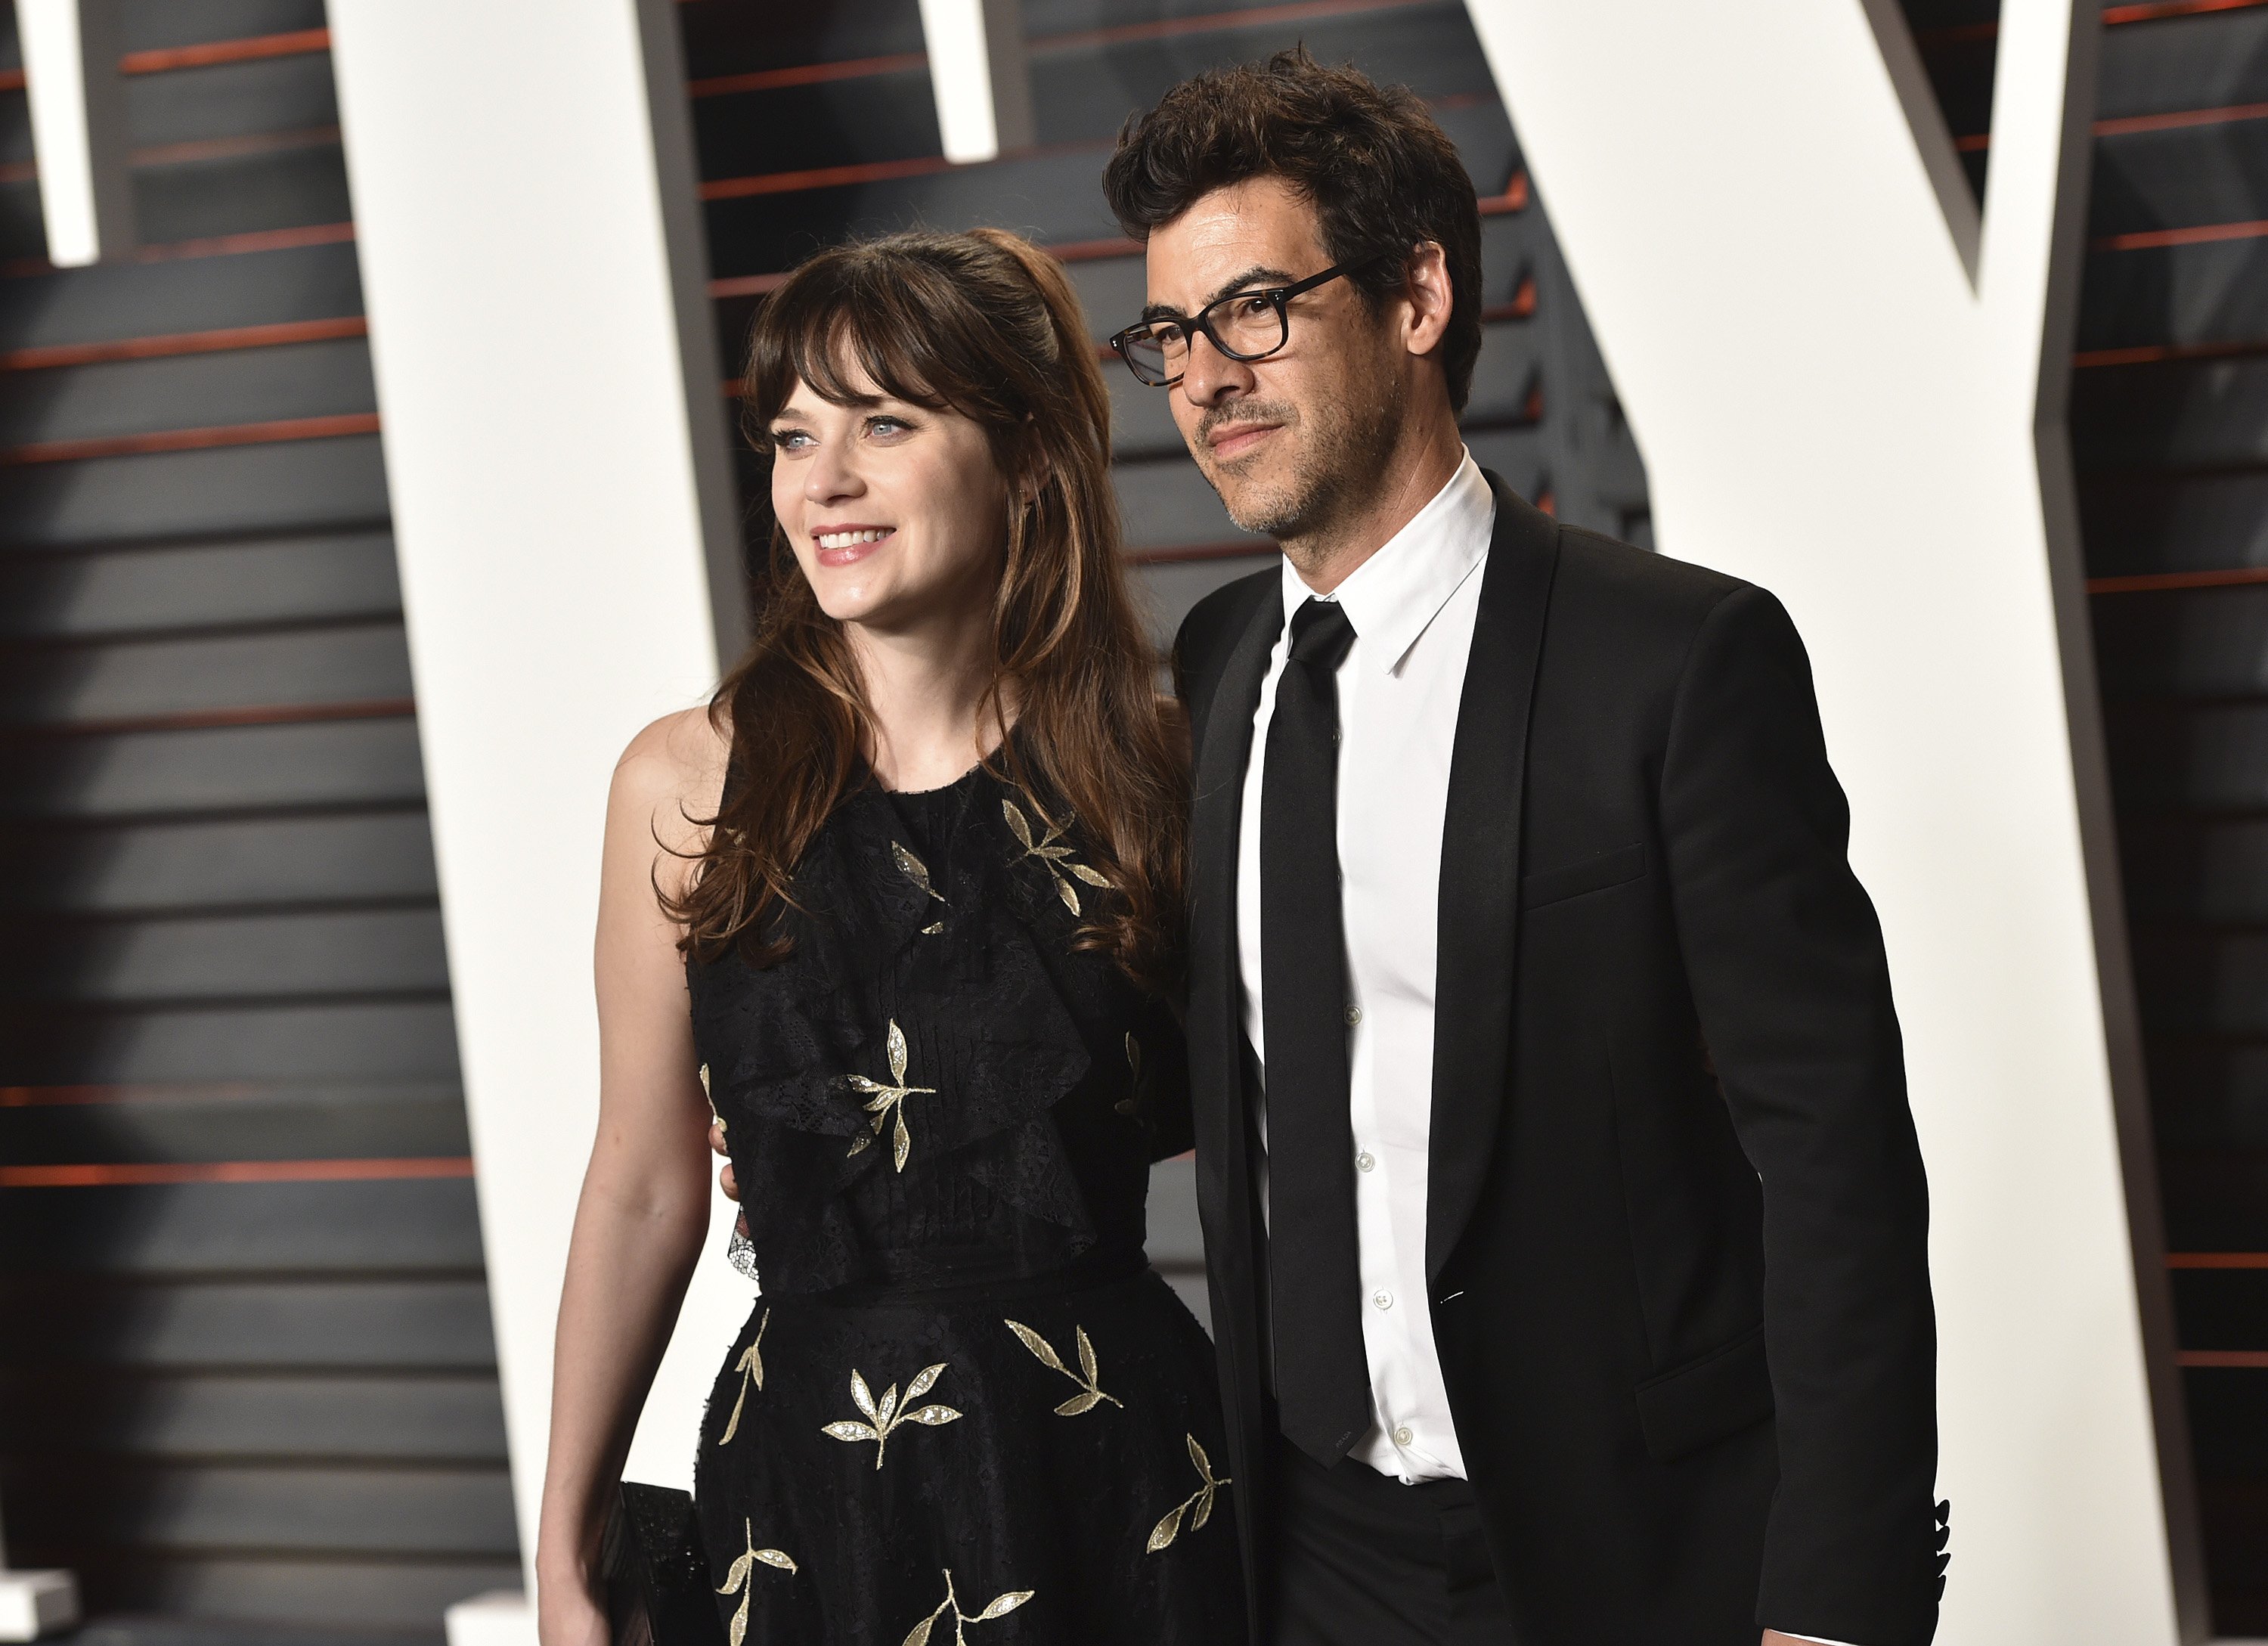 Zooey Deschanel and Jacob Pechenik arrive at the 2016 Vanity Fair Oscar Party Hosted By Graydon Carter on February 28, 2016, in Beverly Hills, California. | Source: Getty Images.